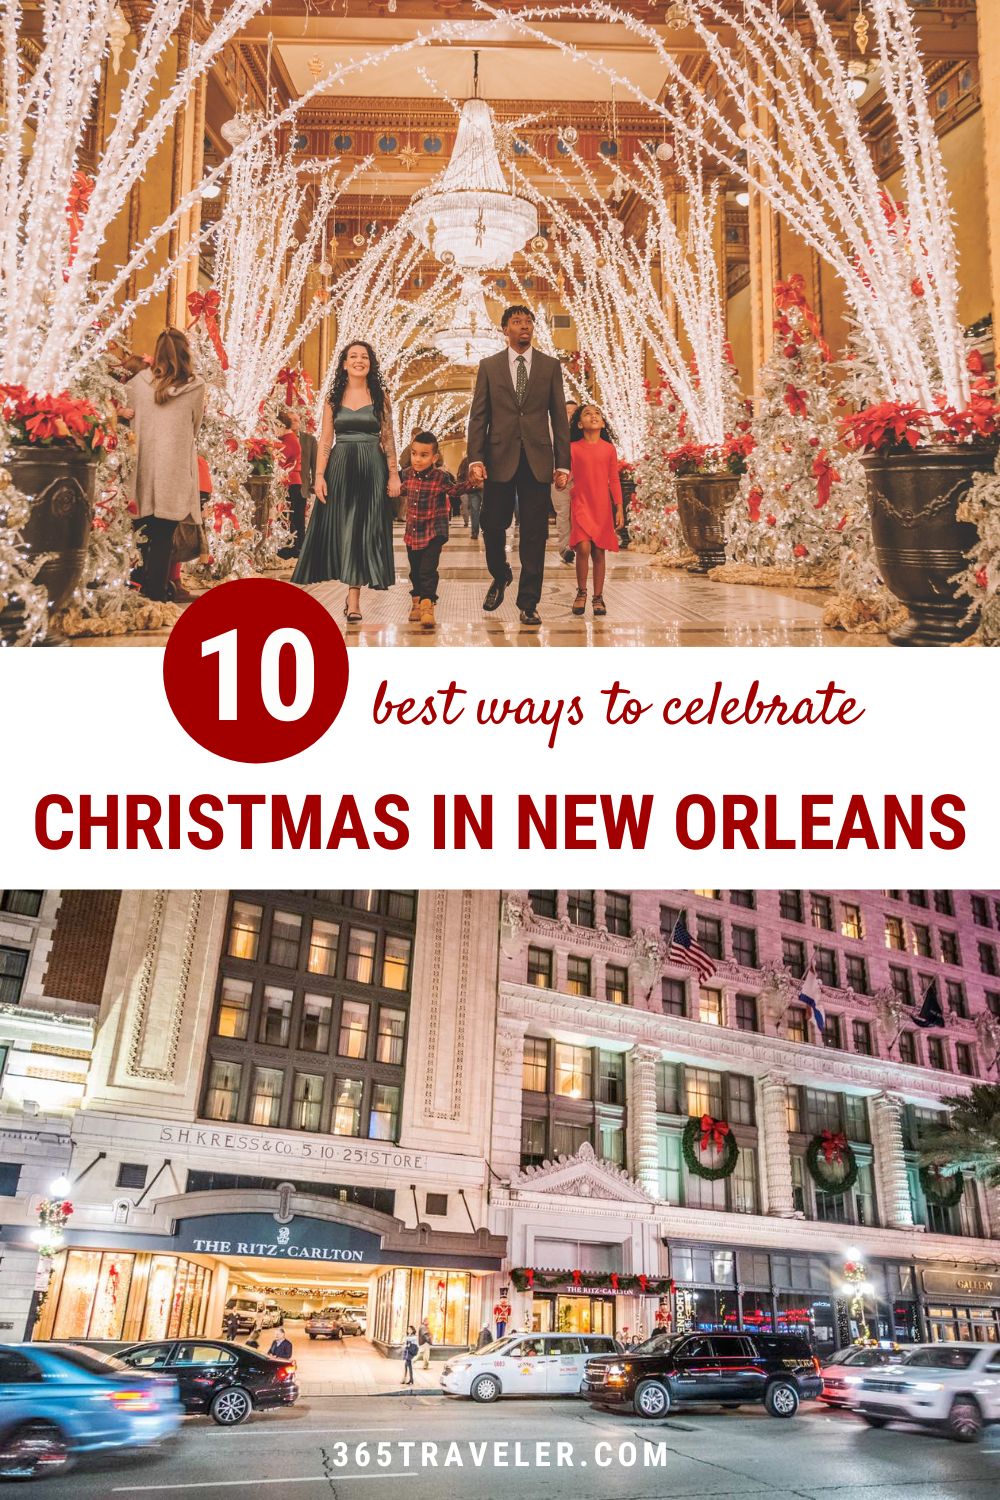 CHRISTMAS IN NEW ORLEANS: 10 GREAT WAYS TO ENJOY THE HOLIDAYS LIKE A LOCAL